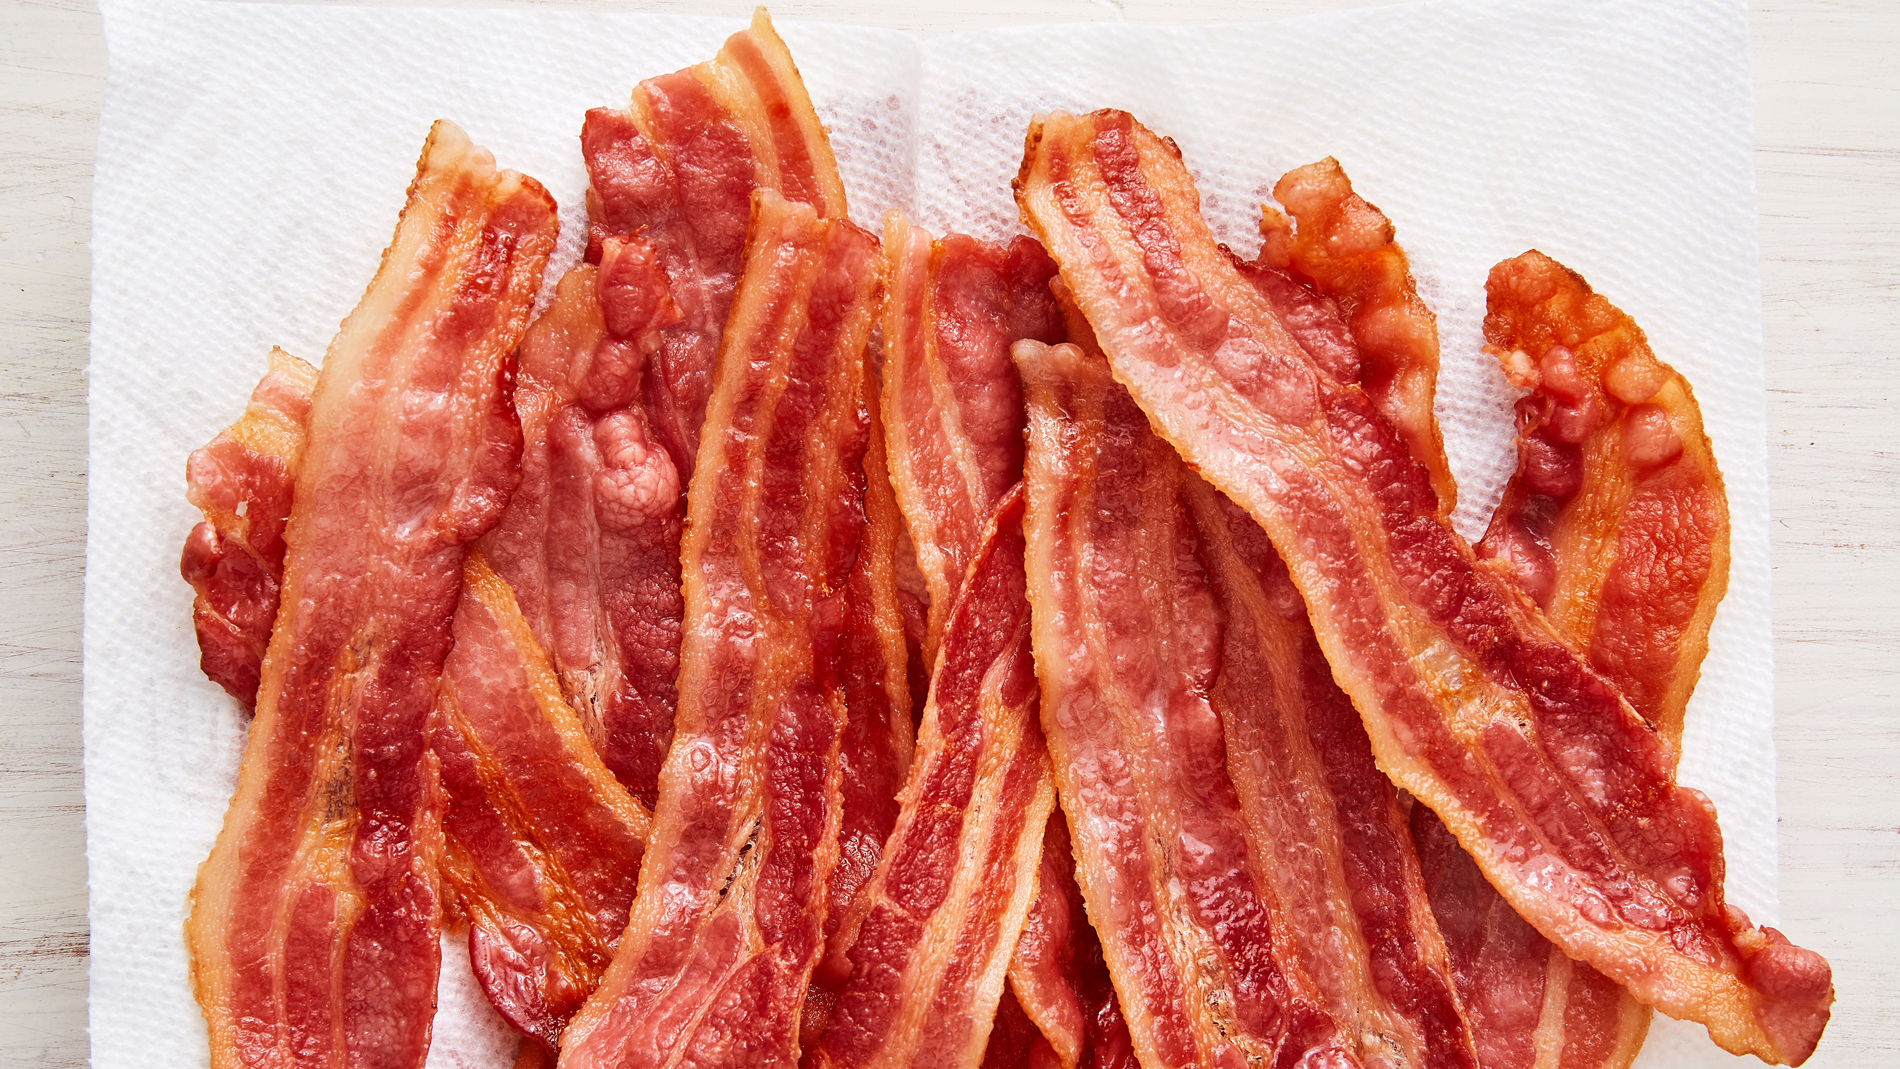 Sharing Class Notes and 'a Ton of Bacon Grease' - The New York Times